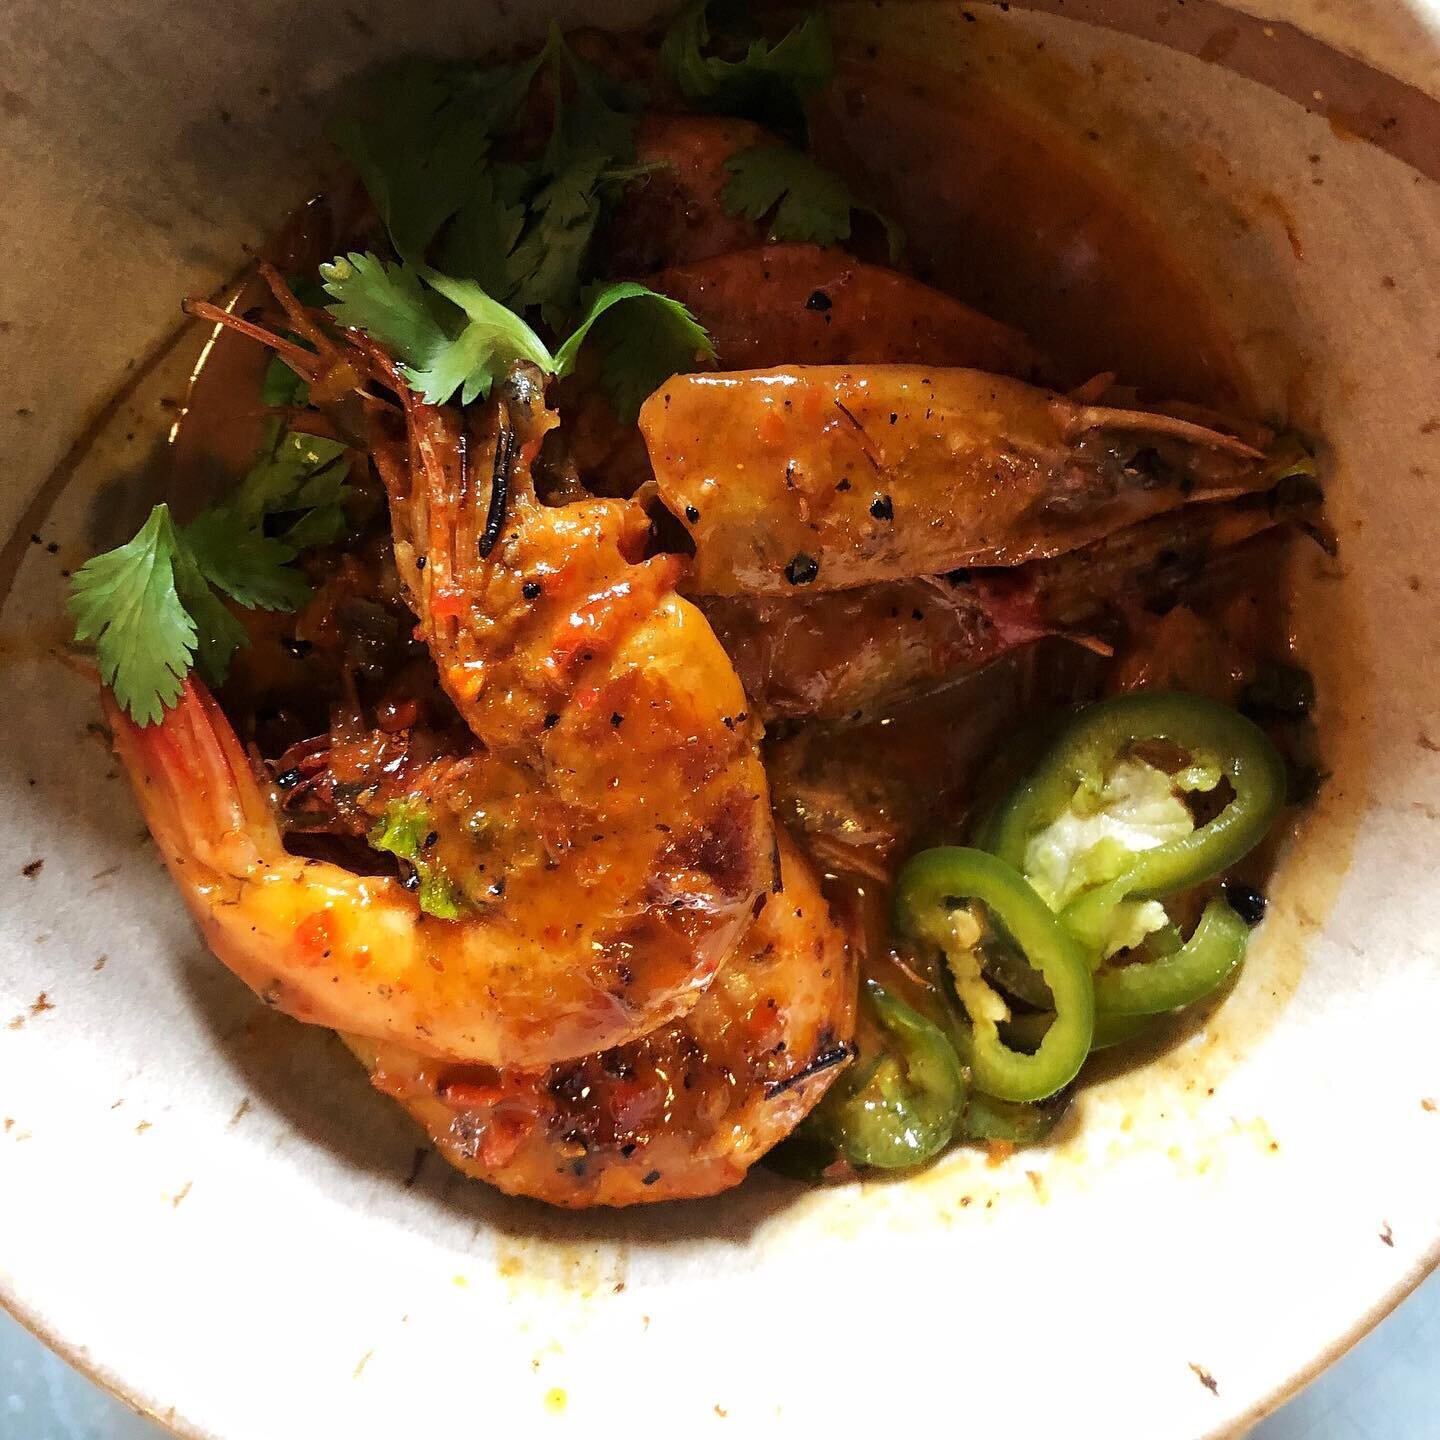 As the designated peeler in a family with an aversion to head-on anything, I had the pleasure of handling the BBQ shrimp - doused in an uh-mazing spicy coconut-lime-cilantro broth - at @strochraleigh. A messy job for sure, but more for me...and that&